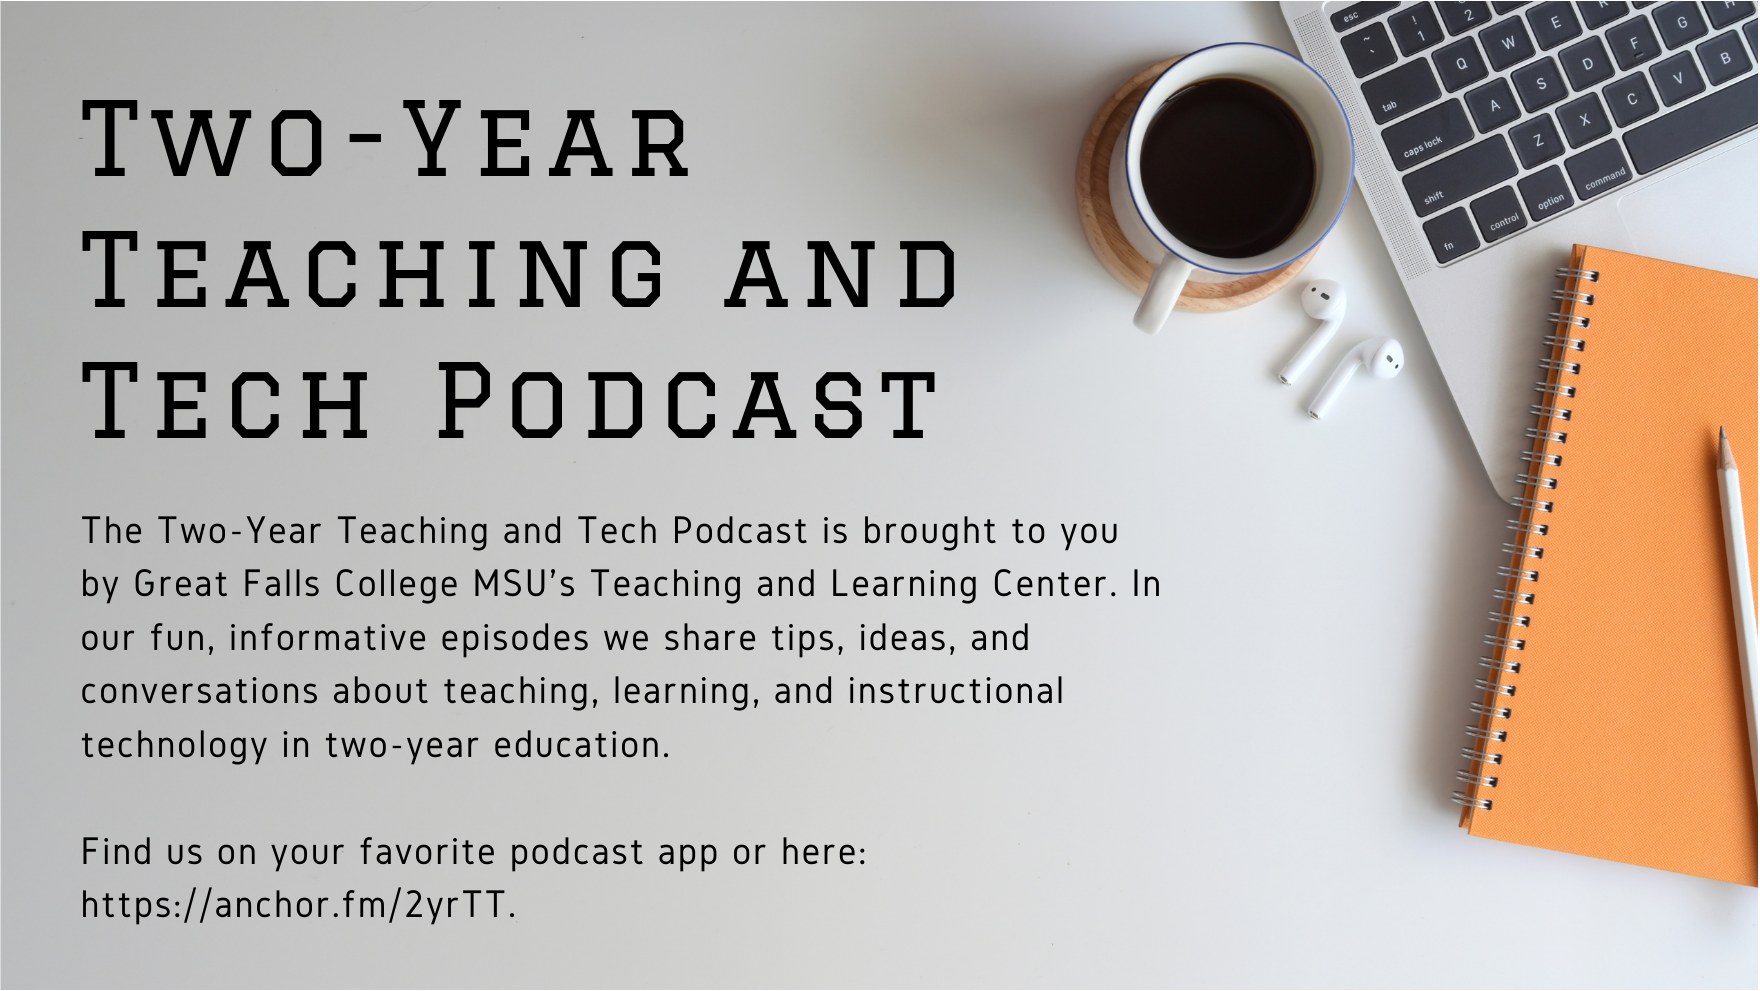 The Two-Year Teaching and Tech Podcast is brought to you by Great Falls College MSU's Teaching and Learning Center. In our fun, informative episodes we share tips, ideas, and conversations about teaching, learning, and instructional technology in two-year education.   Find us on your favorite podcast app or https://anchor.fm/2yrTT. 